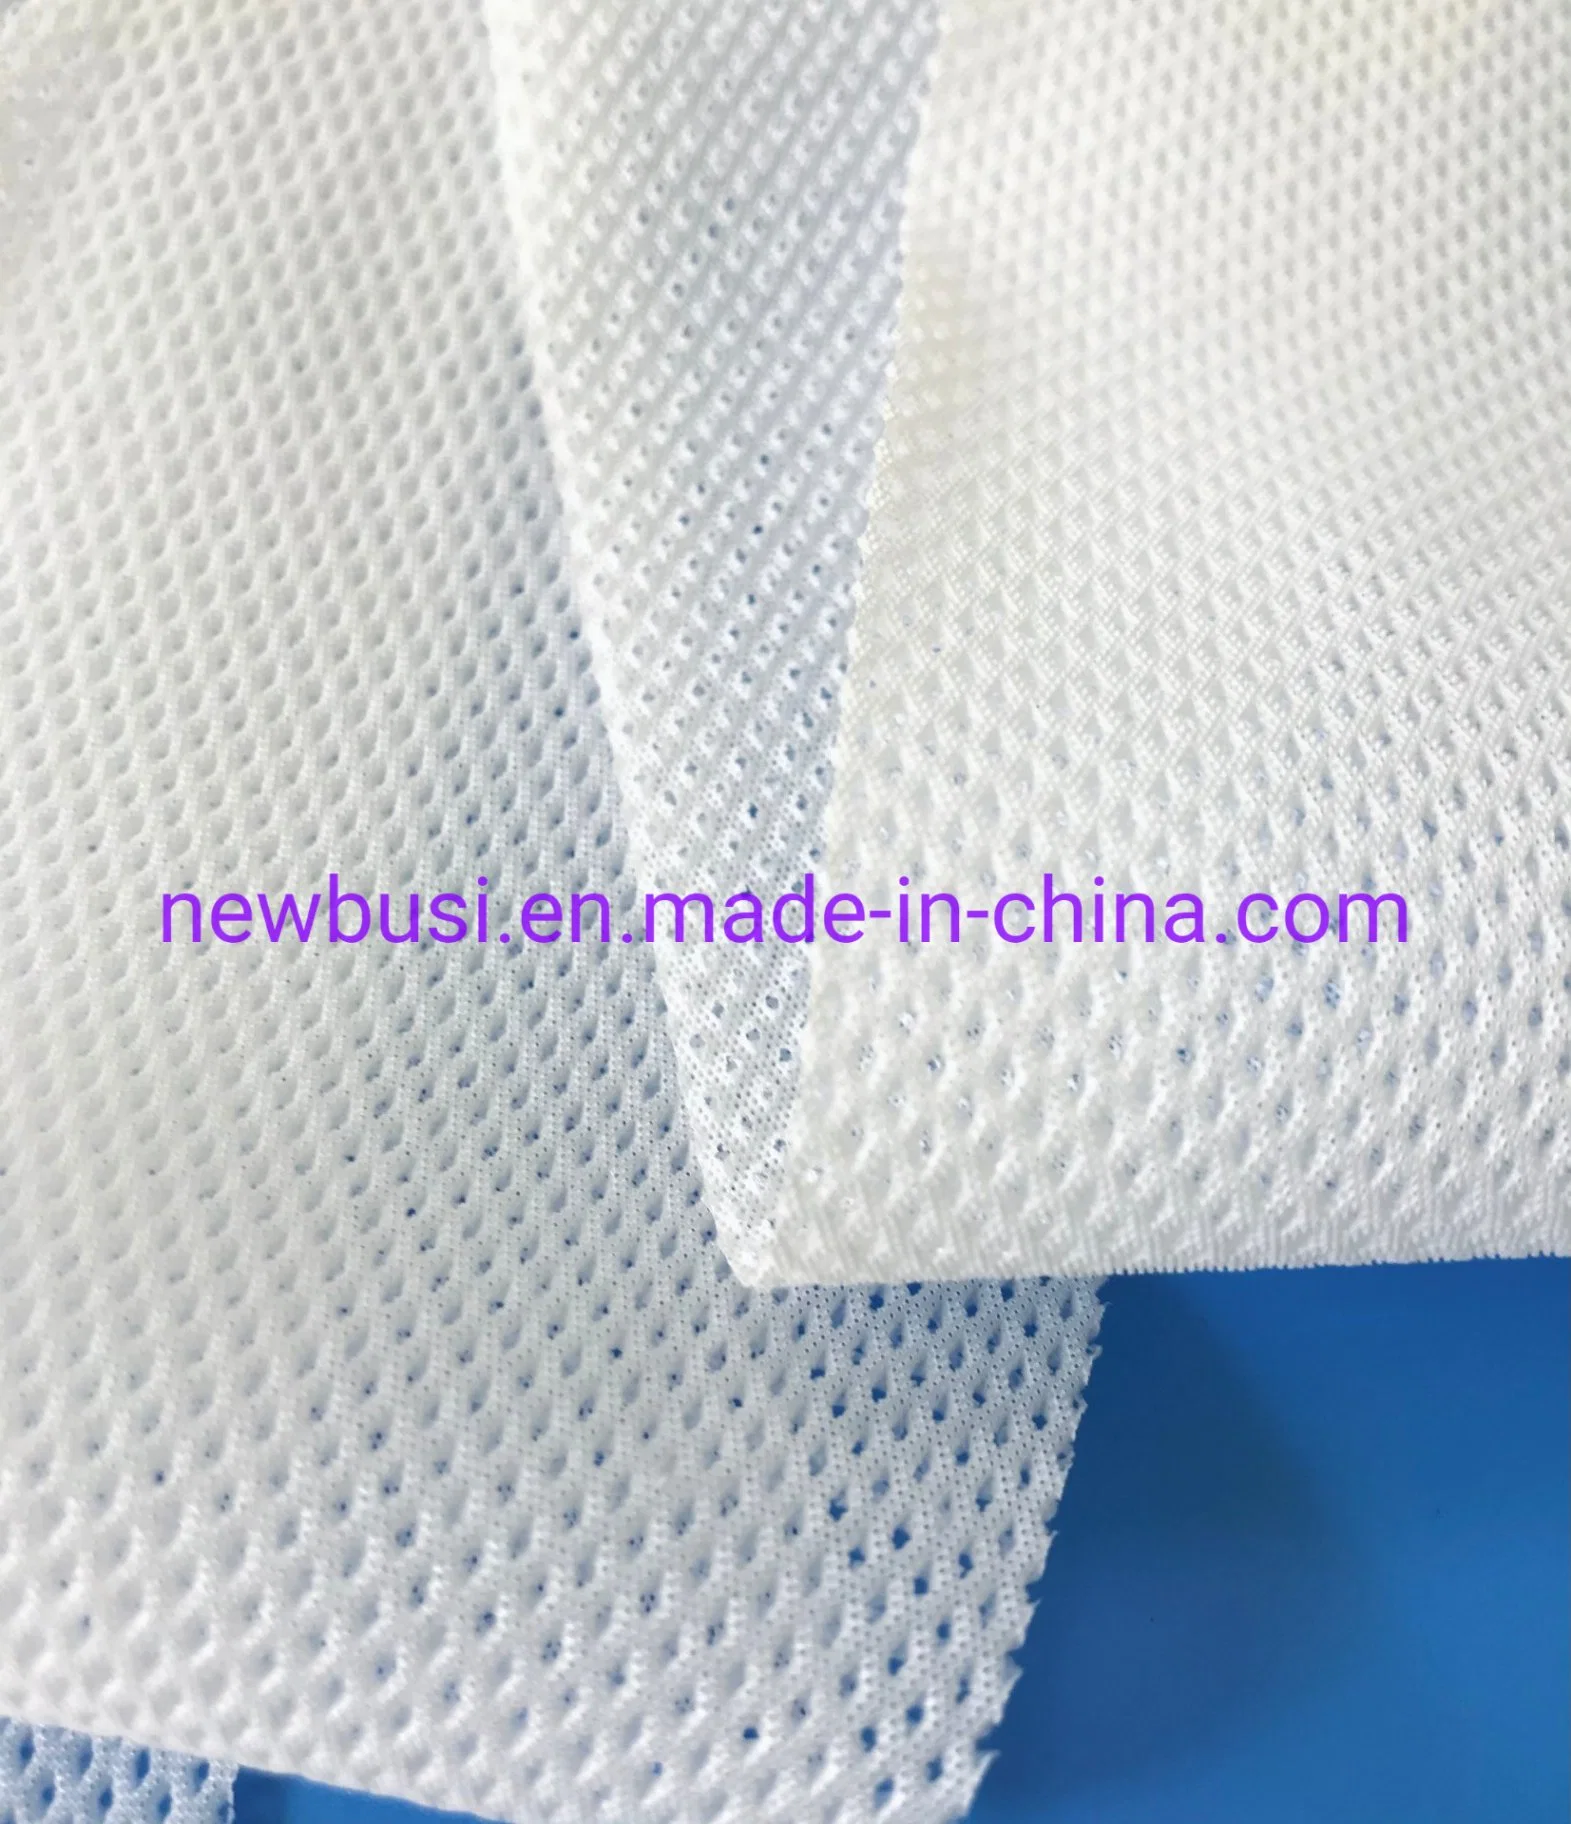 Dry Perforated Film Top-Sheet for Sanitary Napkins